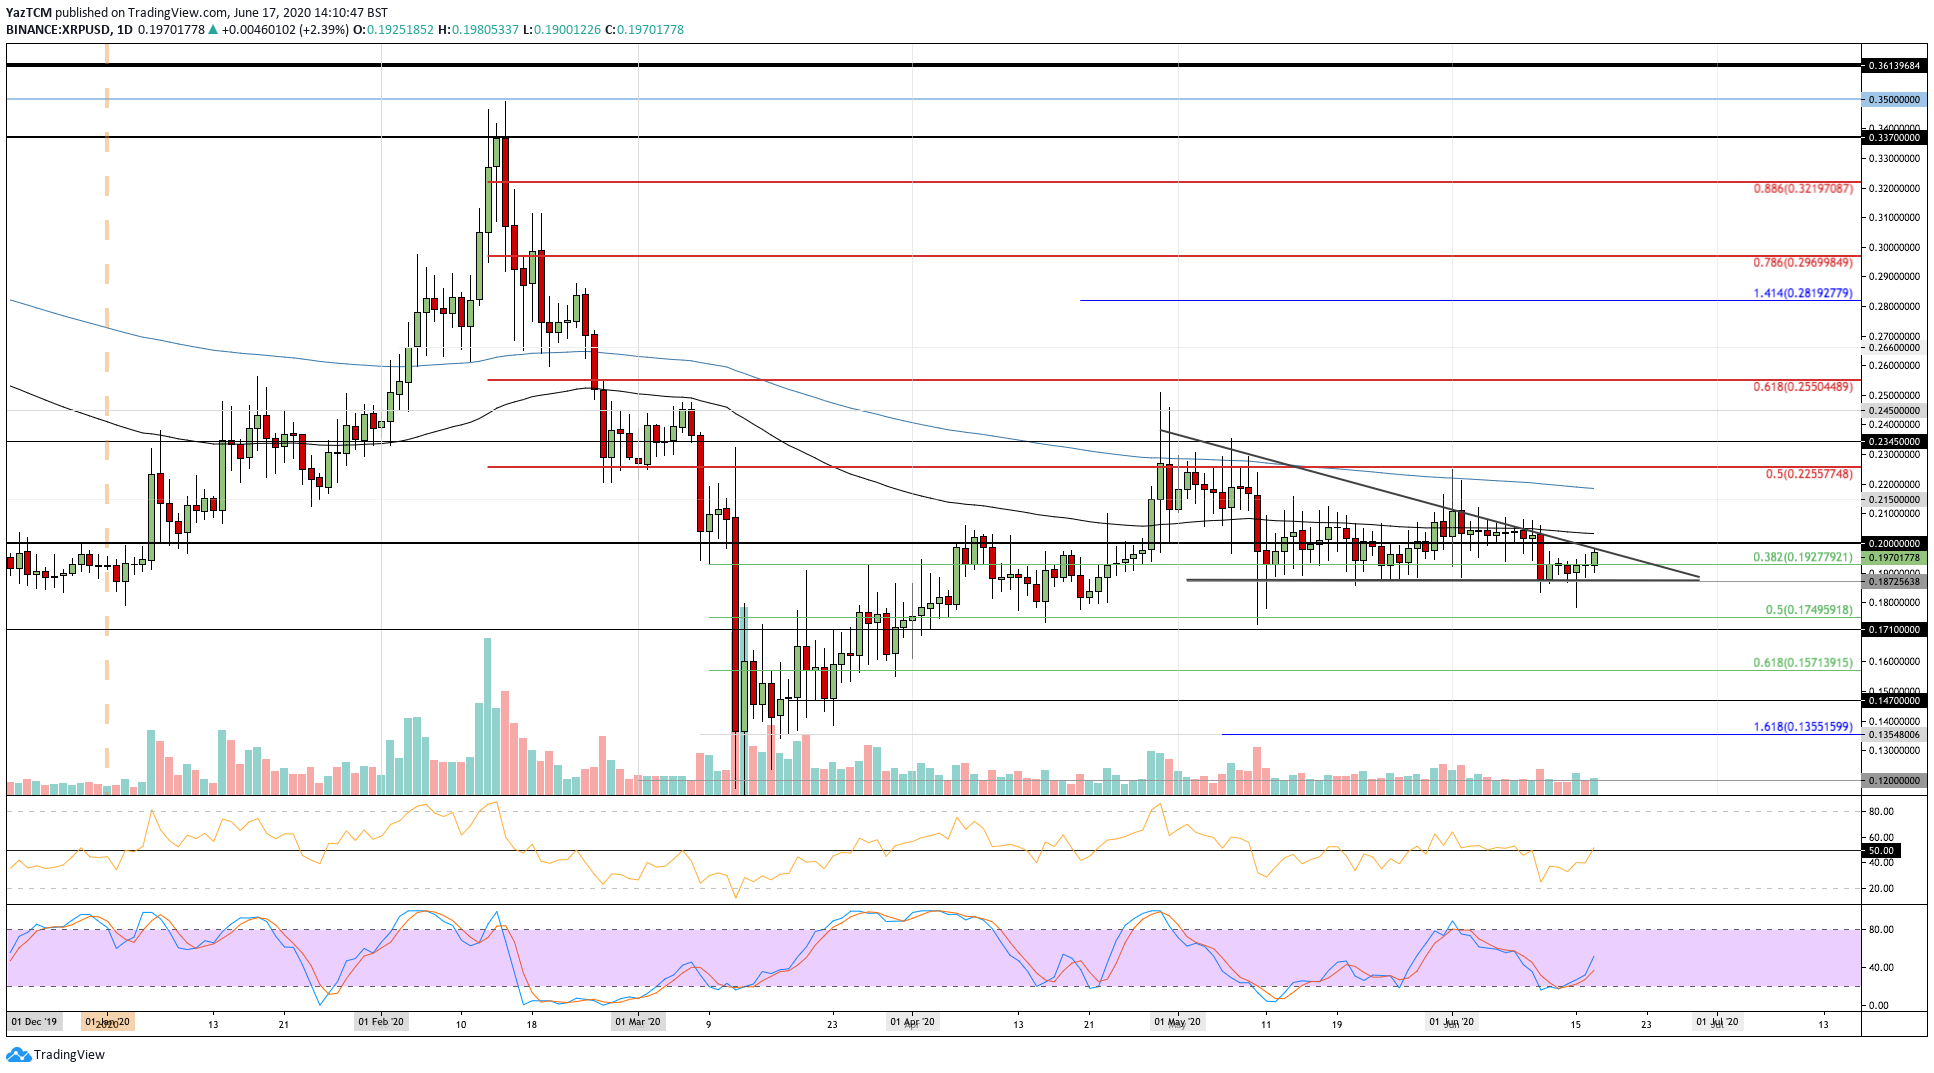 Ripple Price Analysis: XRP Pushing To $0.20 But Descending Triangle Still in Play